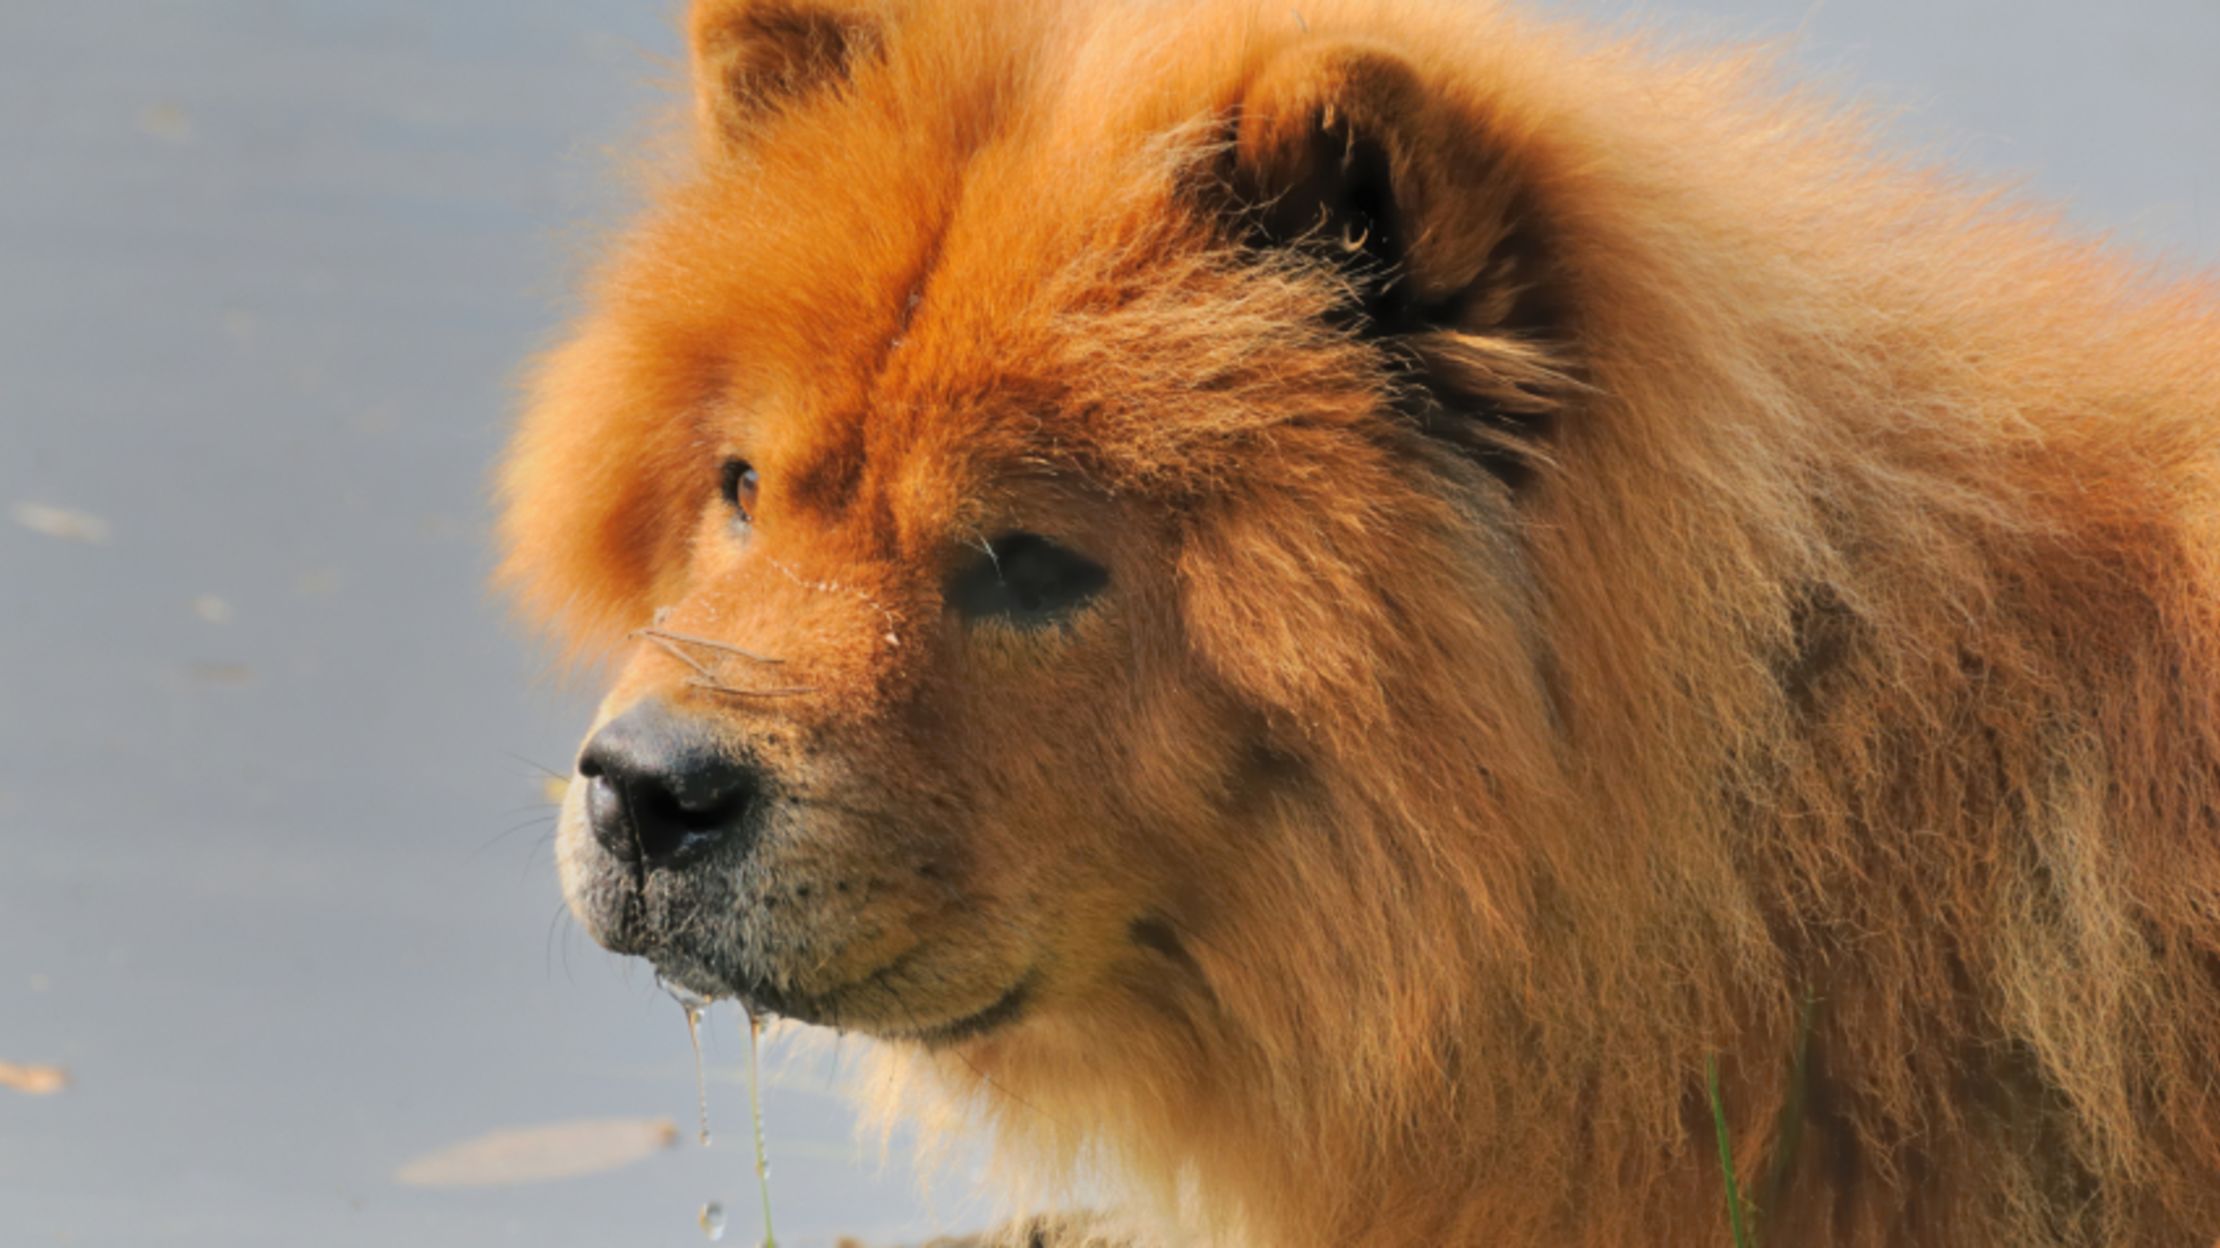 11 Fluffy Facts About Chow Chows Mental Floss